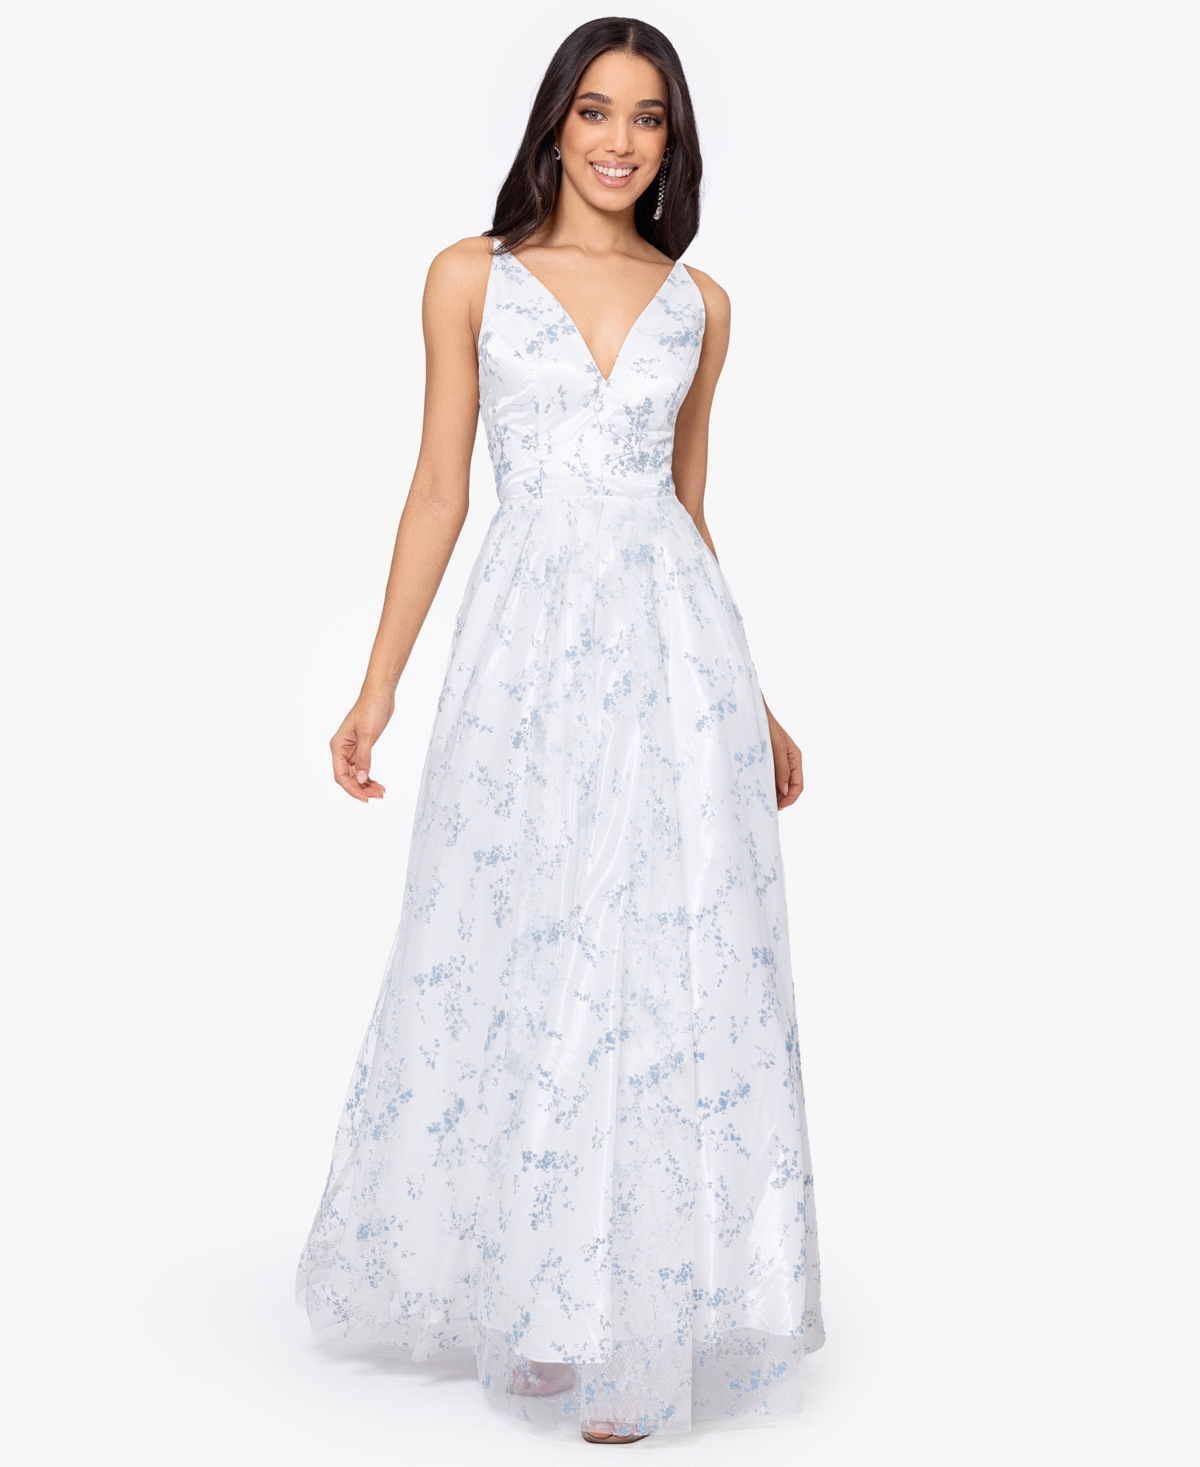 Juniors' Glittered Lace-Up Gown - White